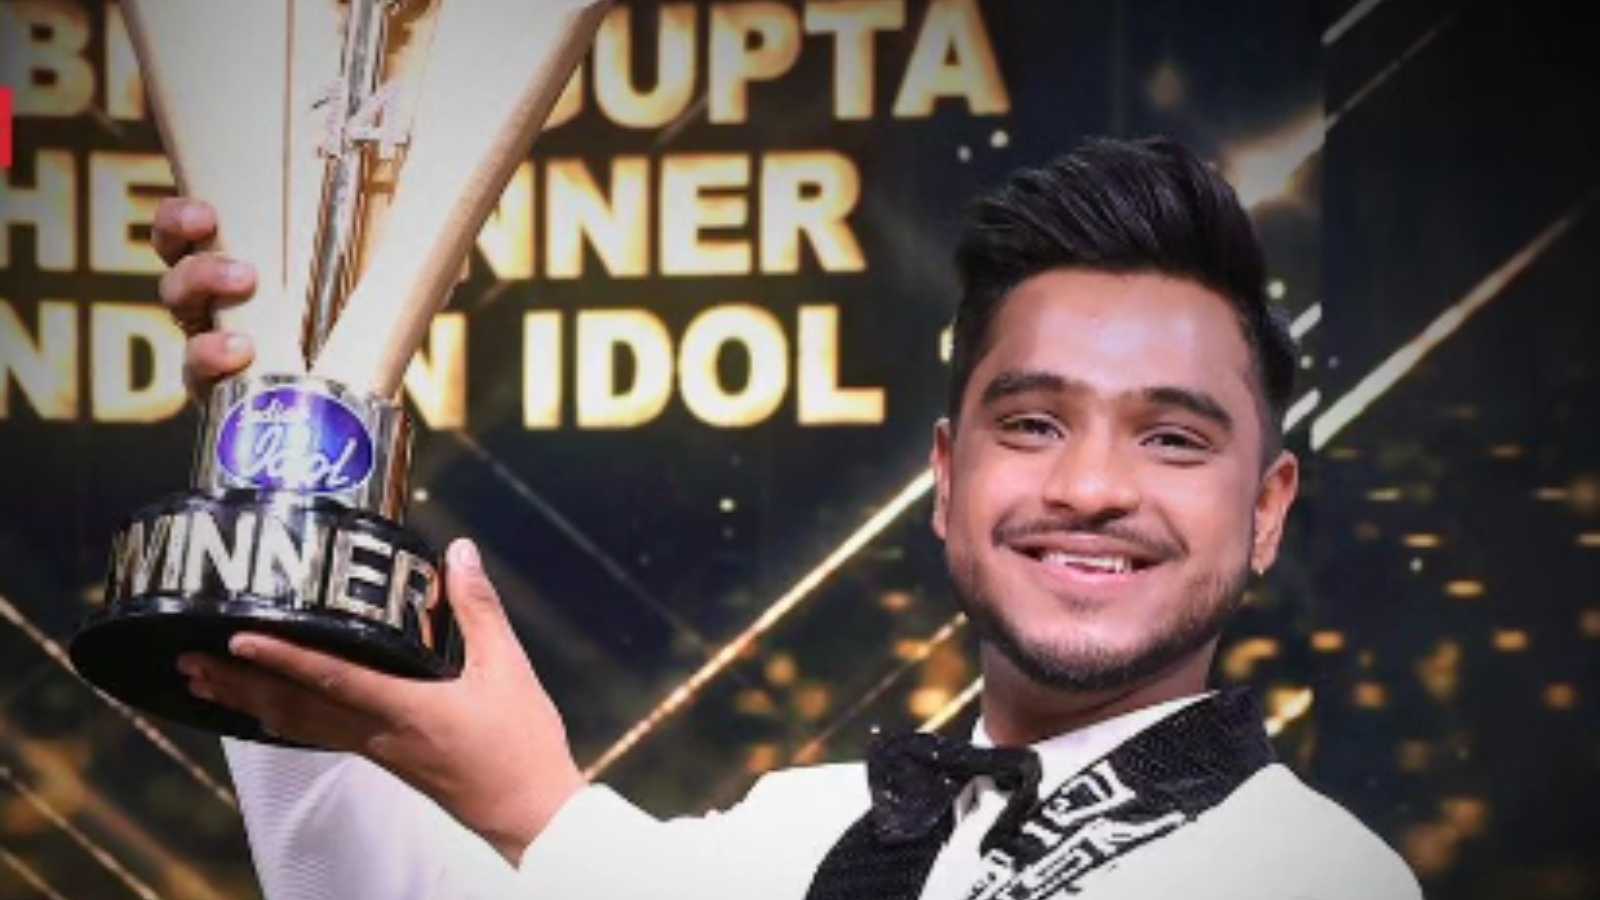 Indian Idol 14: Vaibhav Gupta takes home the trophy and cash prize of Rs 25 lakh, here's all you need to know about him